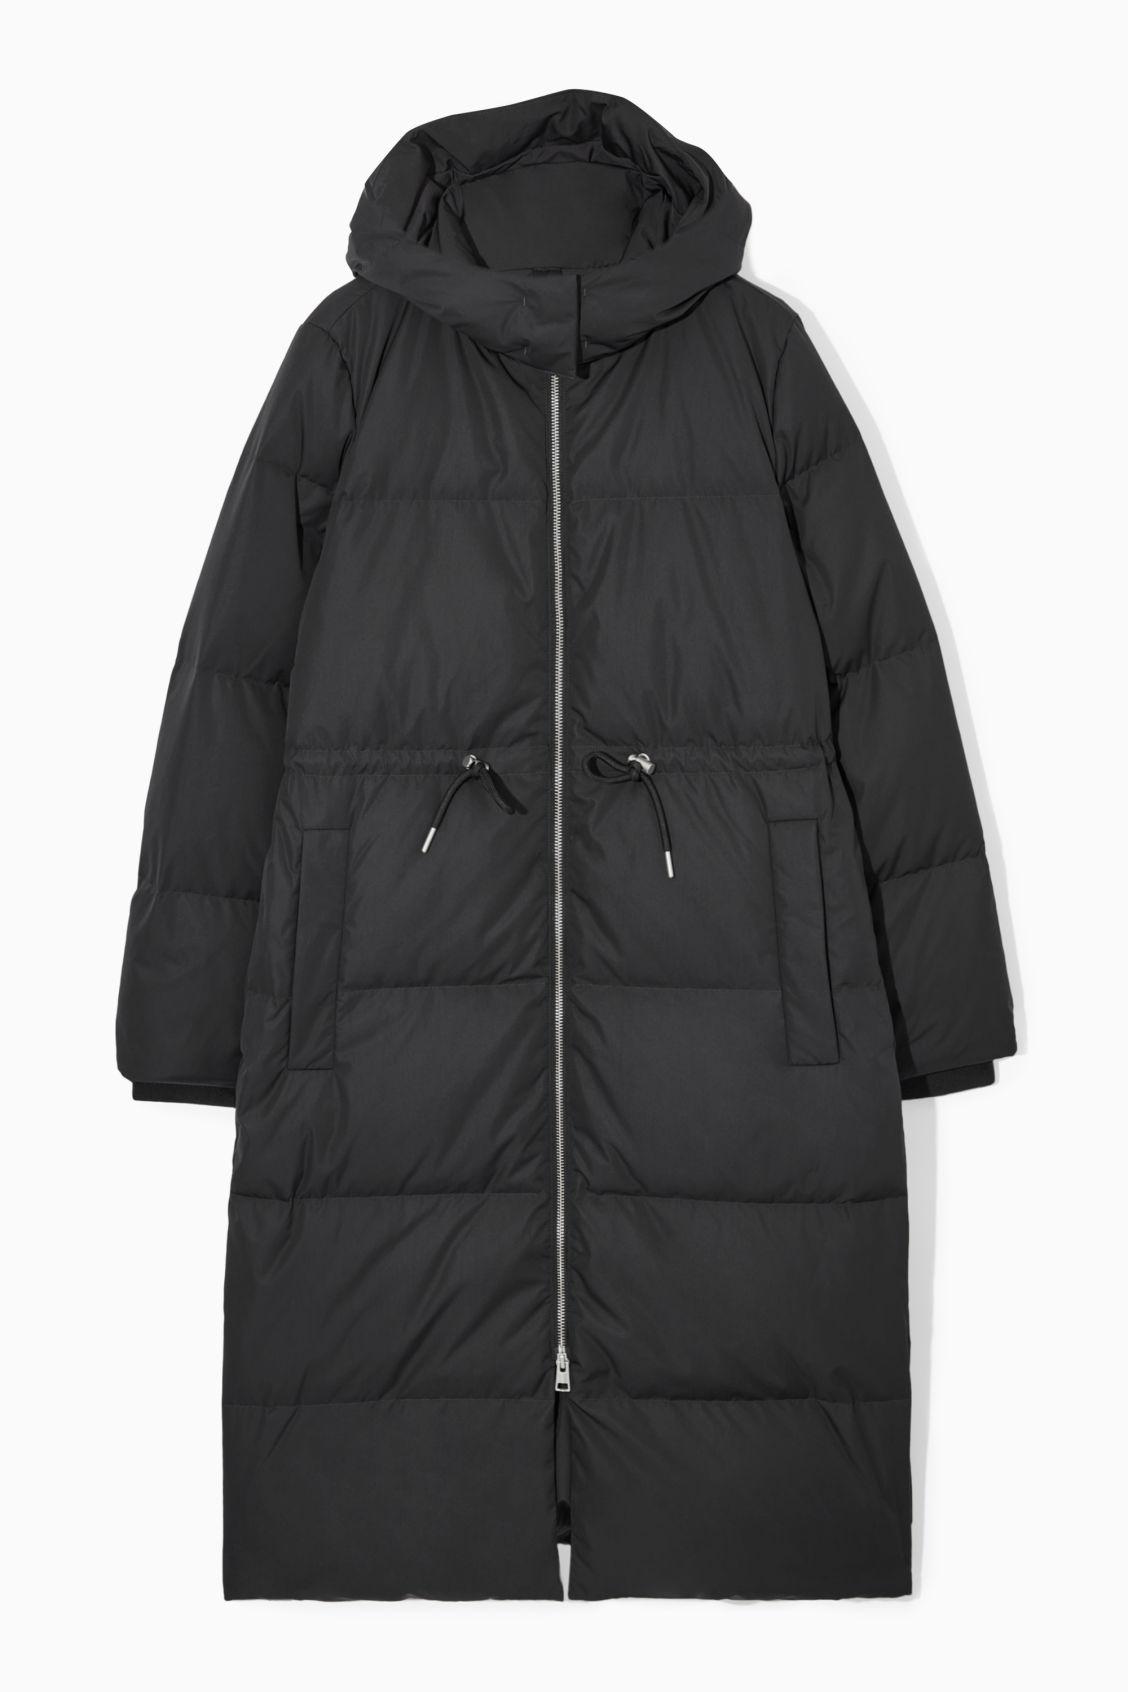 COS Hooded Recycled Down Puffer Coat in Black | Lyst